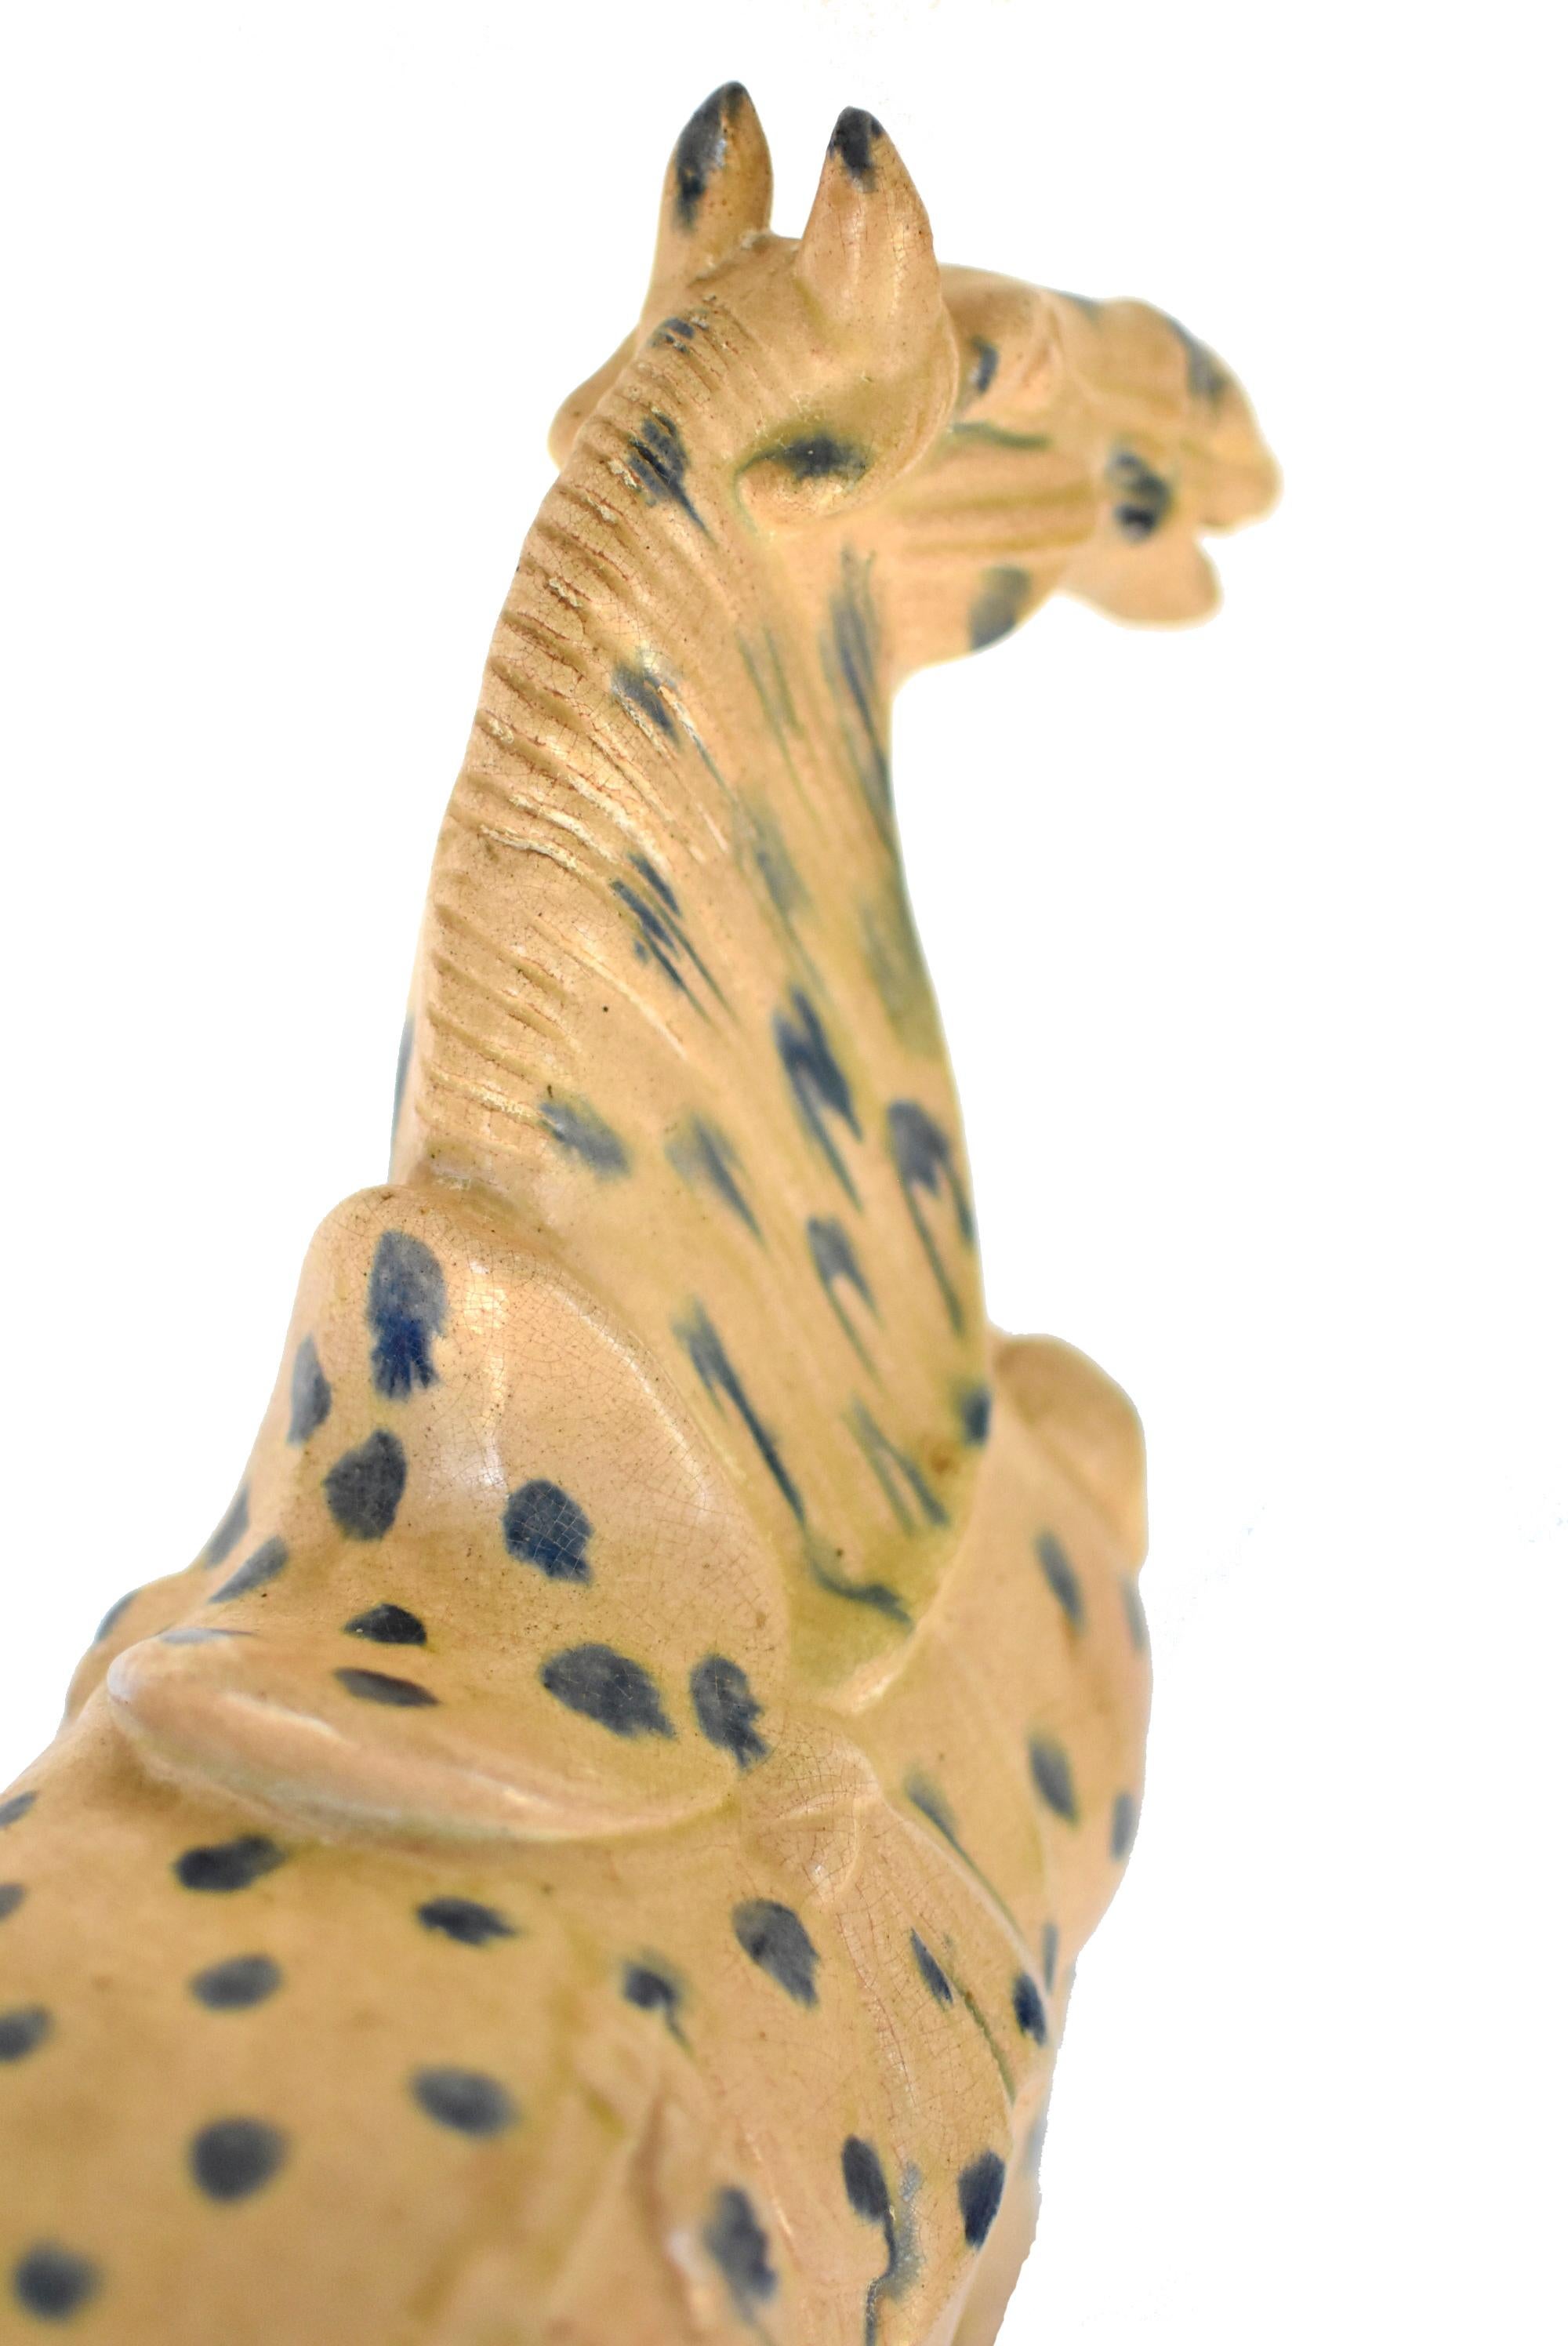 Large Chinese Pottery Stallion Horse, with Blue Spots 10